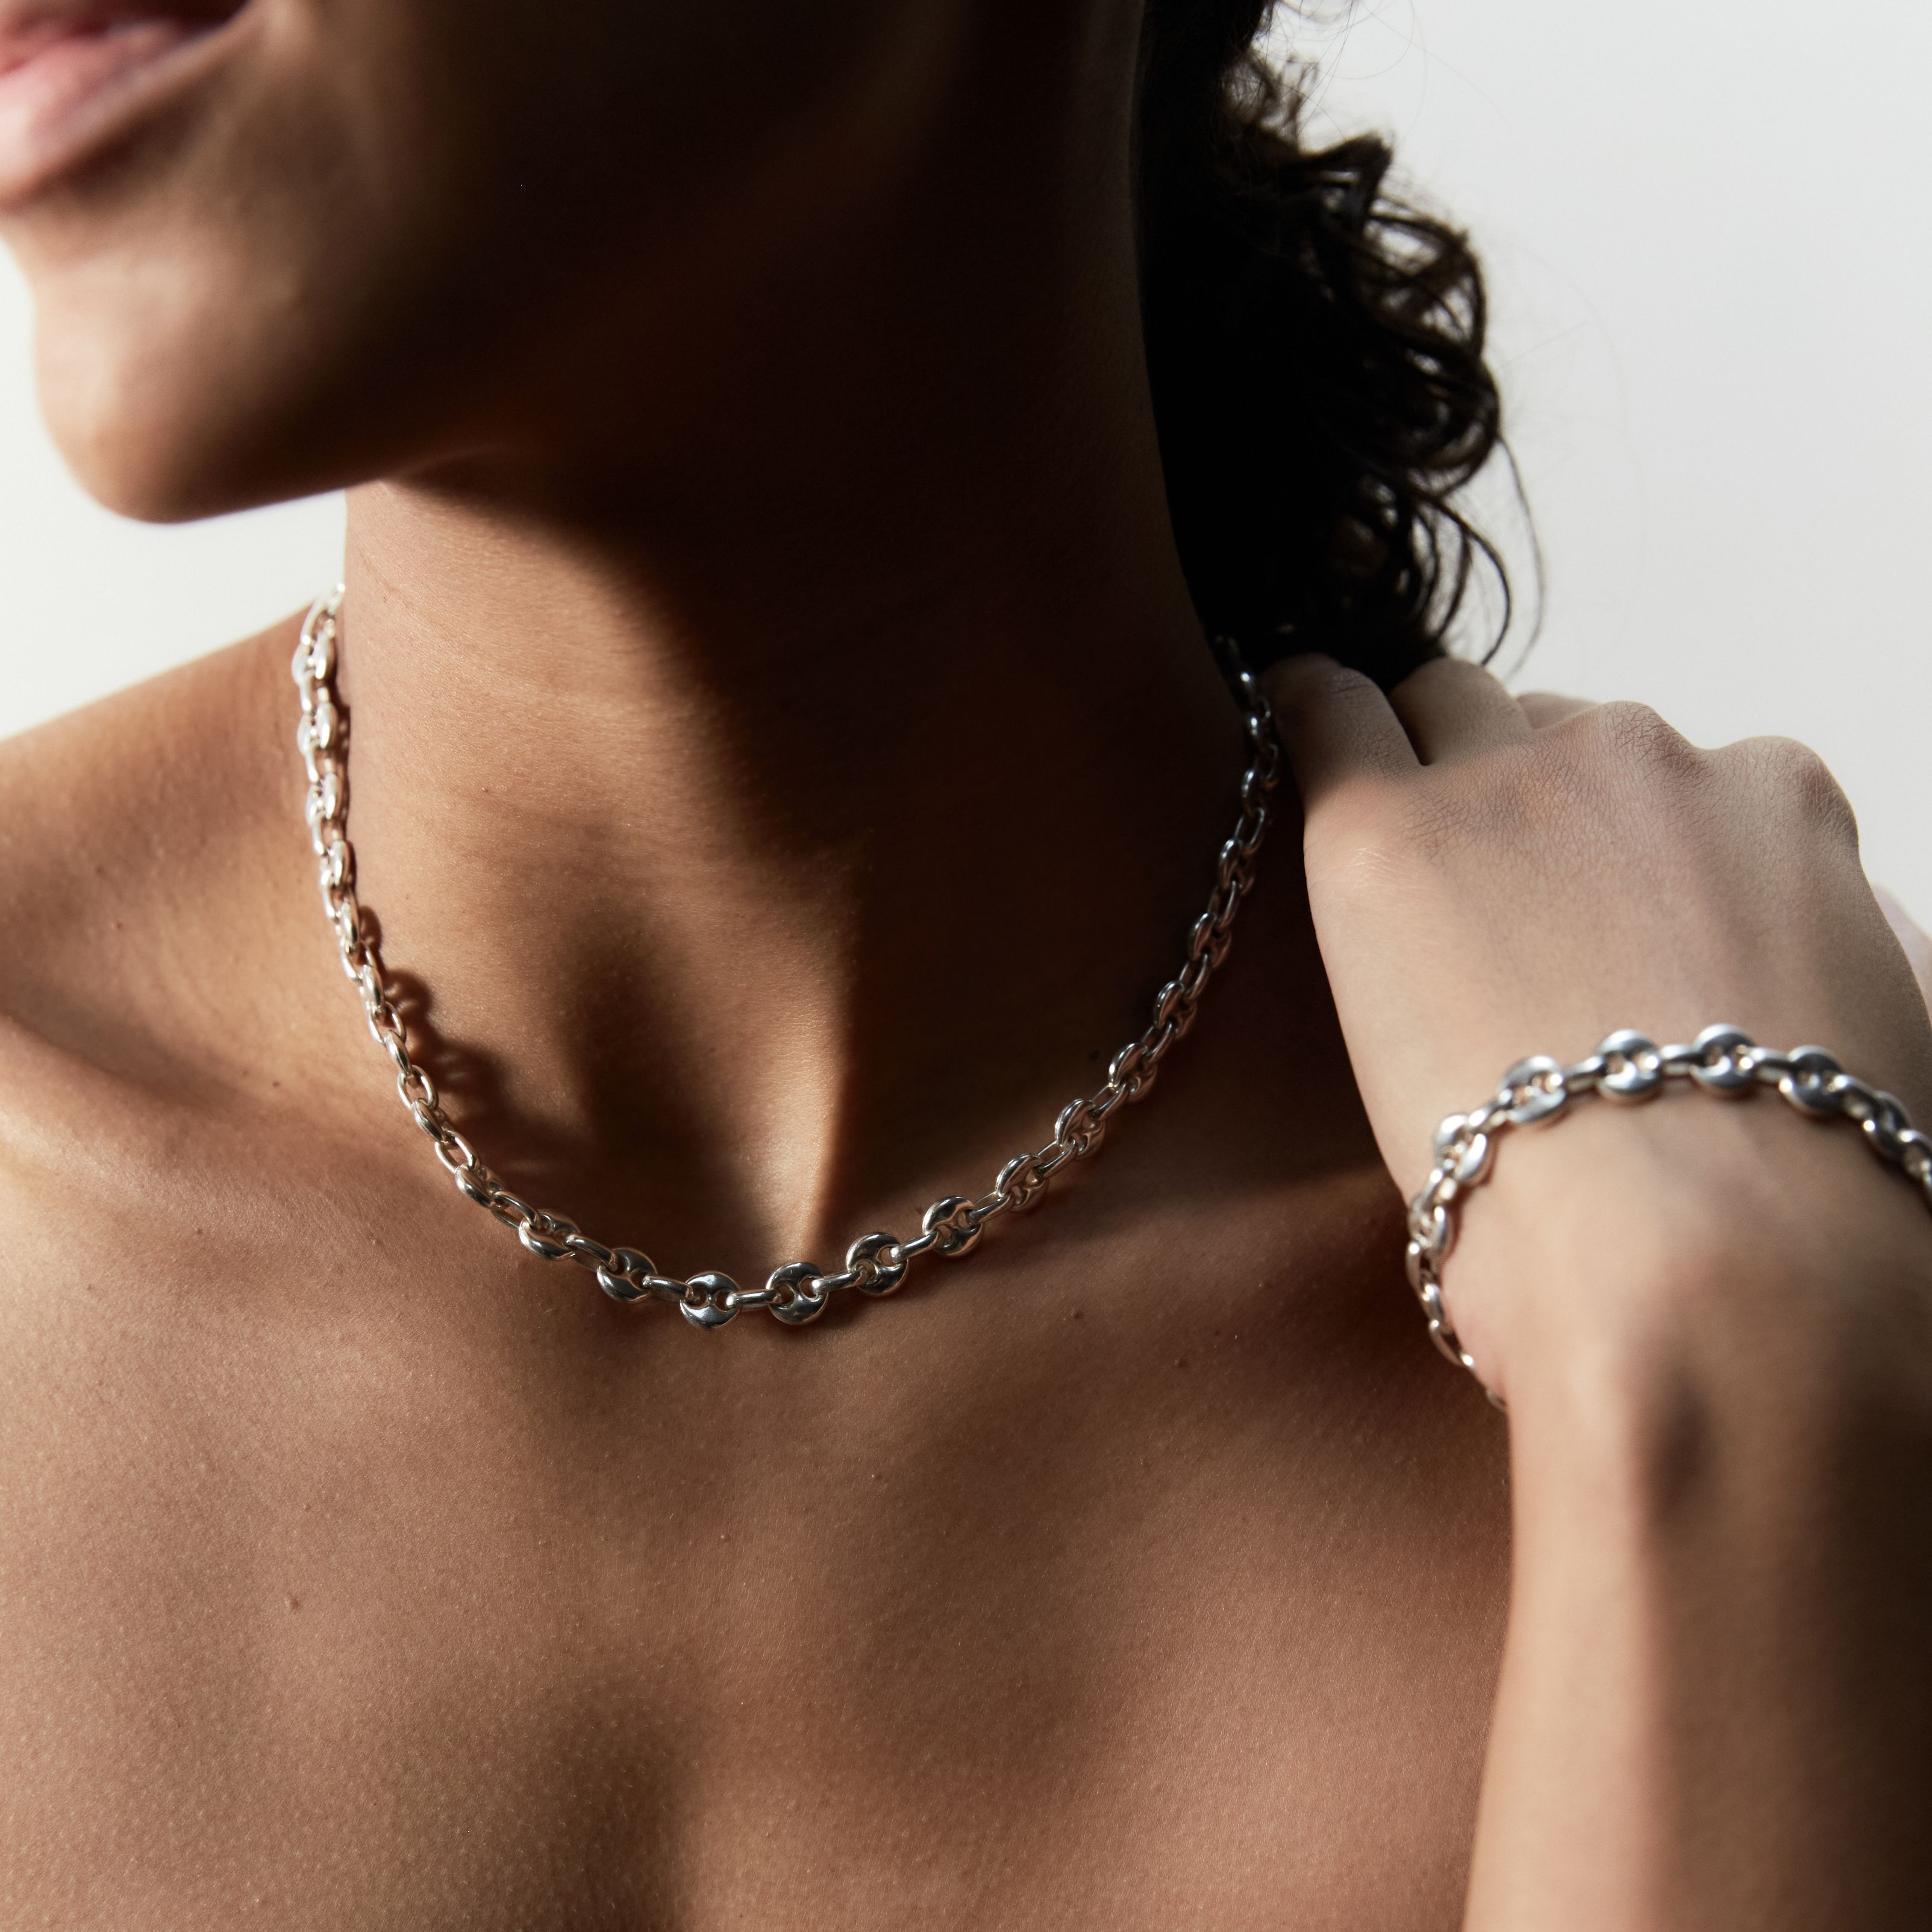 YouTube Star Liza Koshy Launches Line Of Necklaces Through Charitable  Jeweler The Giving Keys - Tubefilter